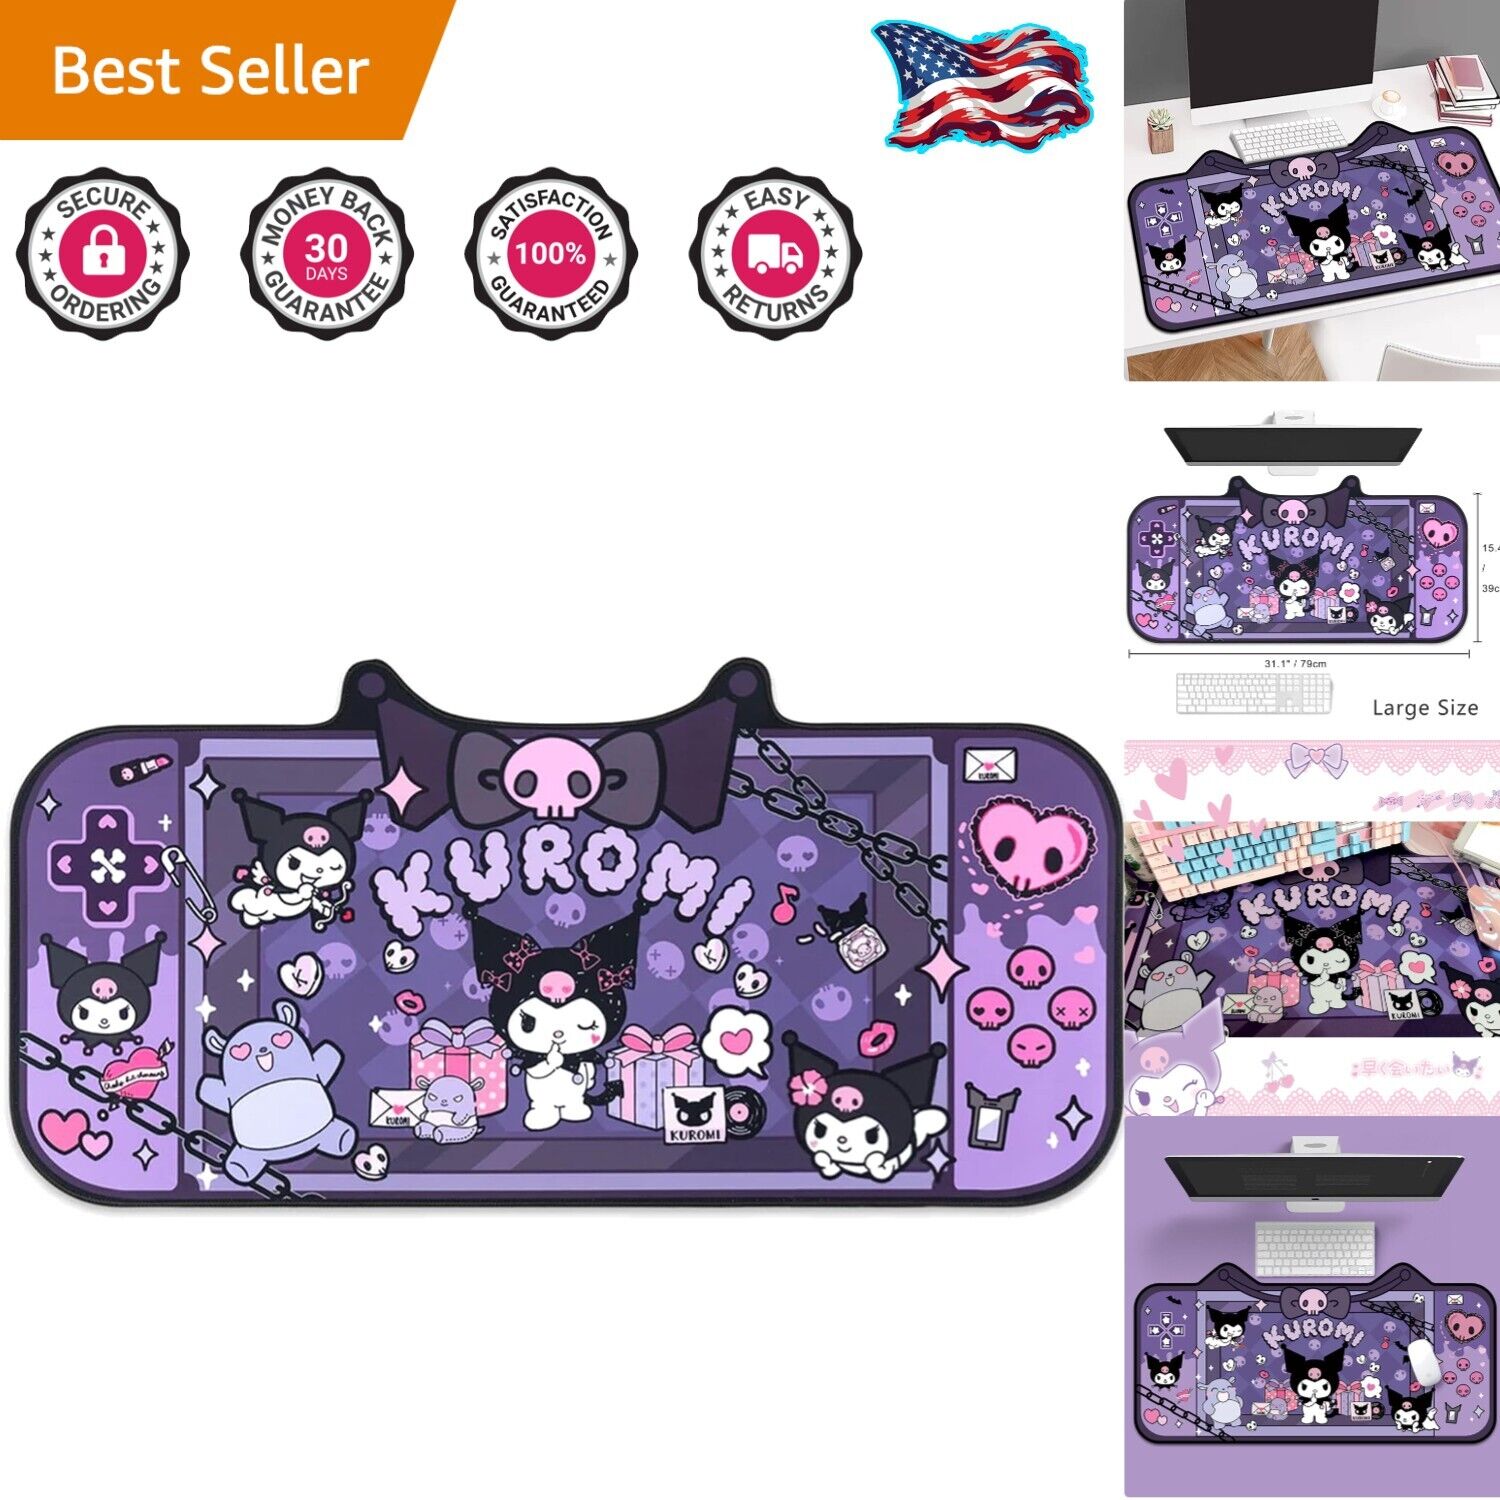 Kawaii Y2K Style Anime Mouse Pad XLarge - Fun Gaming Desk Accessory for Girls